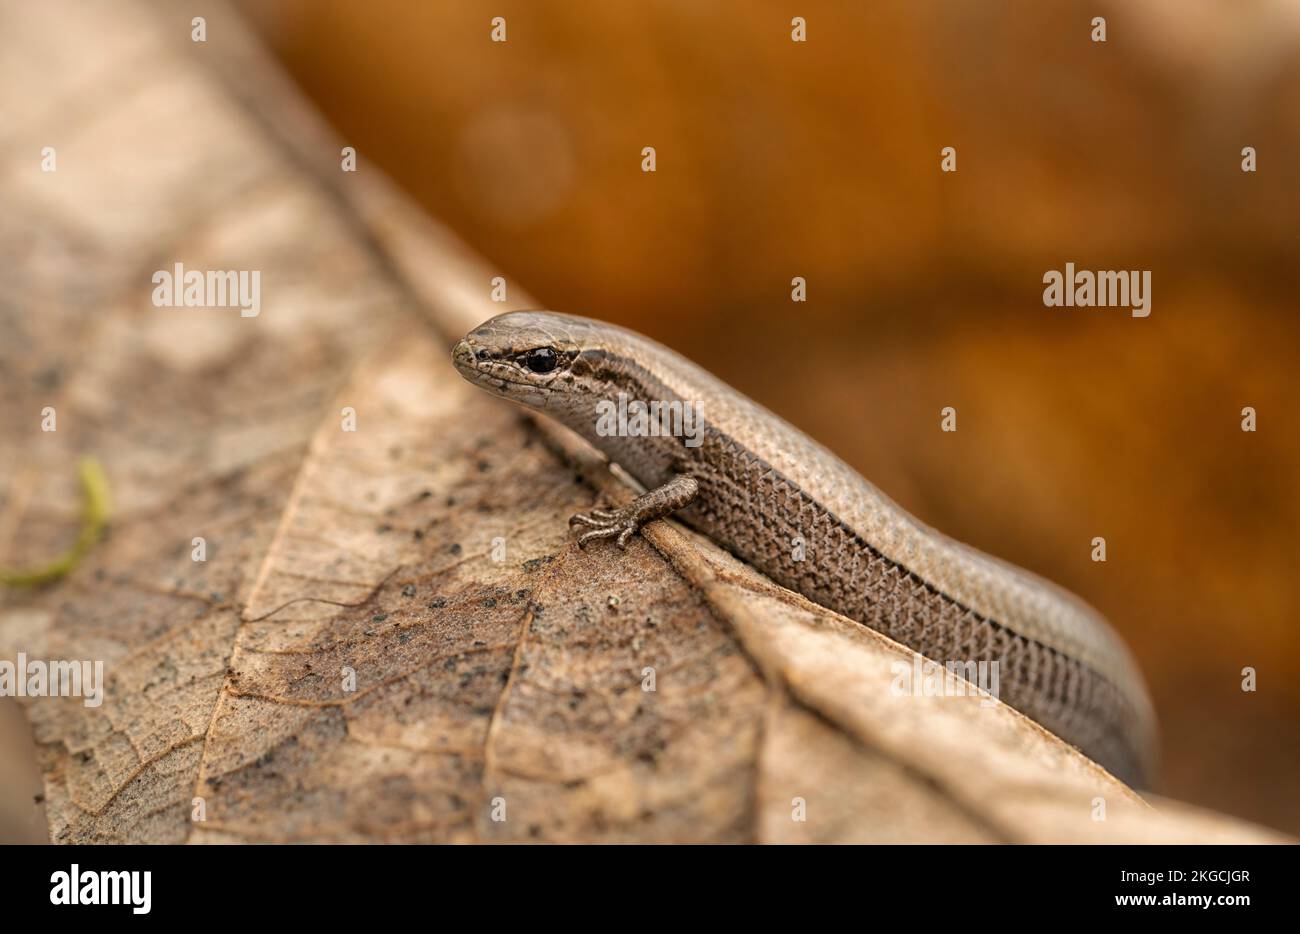 A closeup shot of a European copper skink crawling on a leaf in a forest on a blurred background Stock Photo